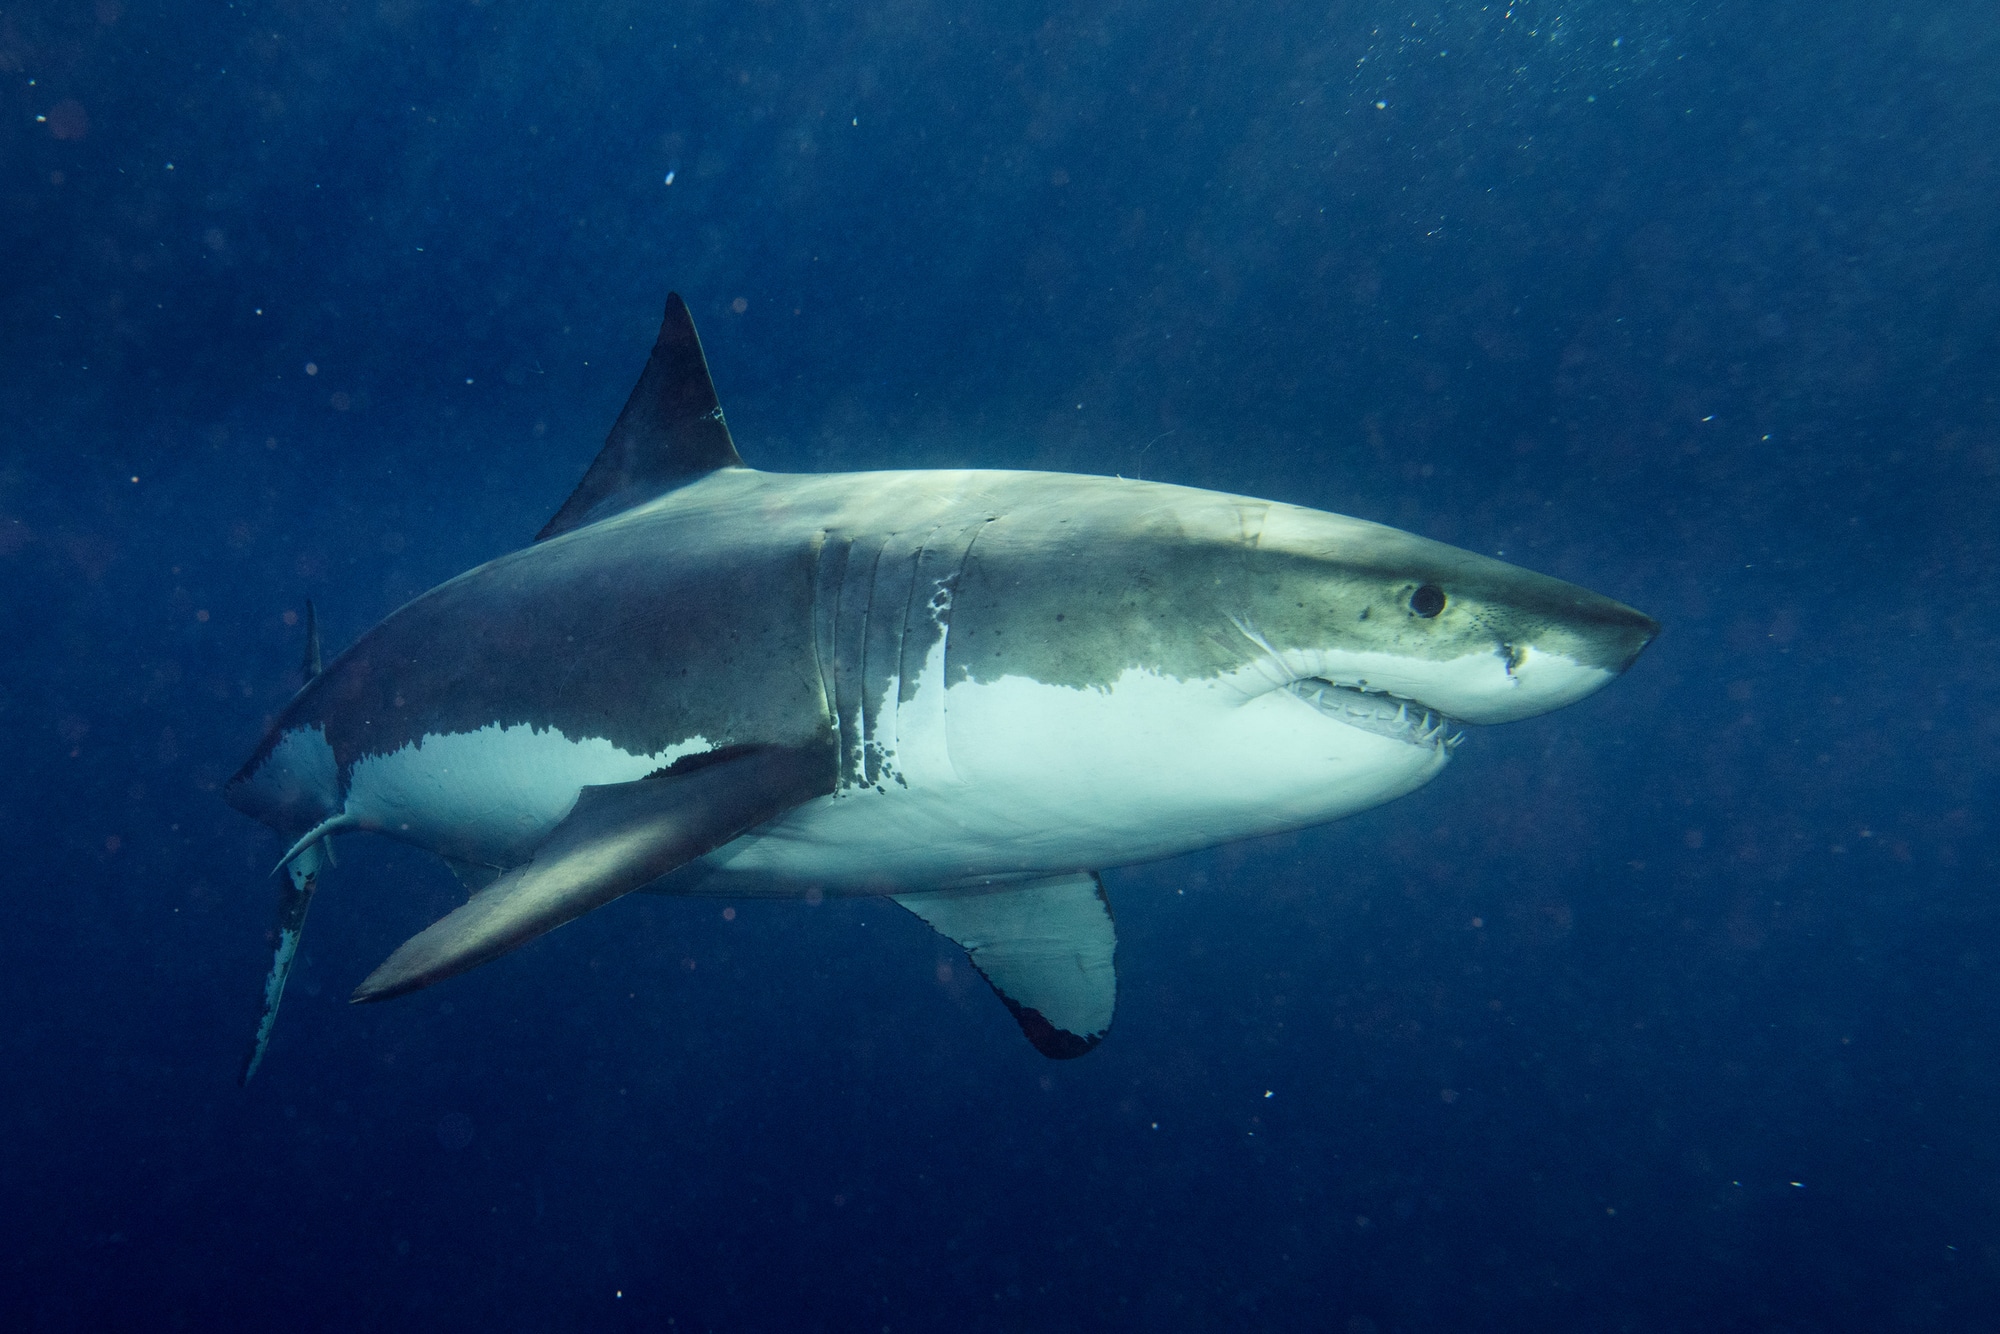 Great White Shark animals that can survive without food